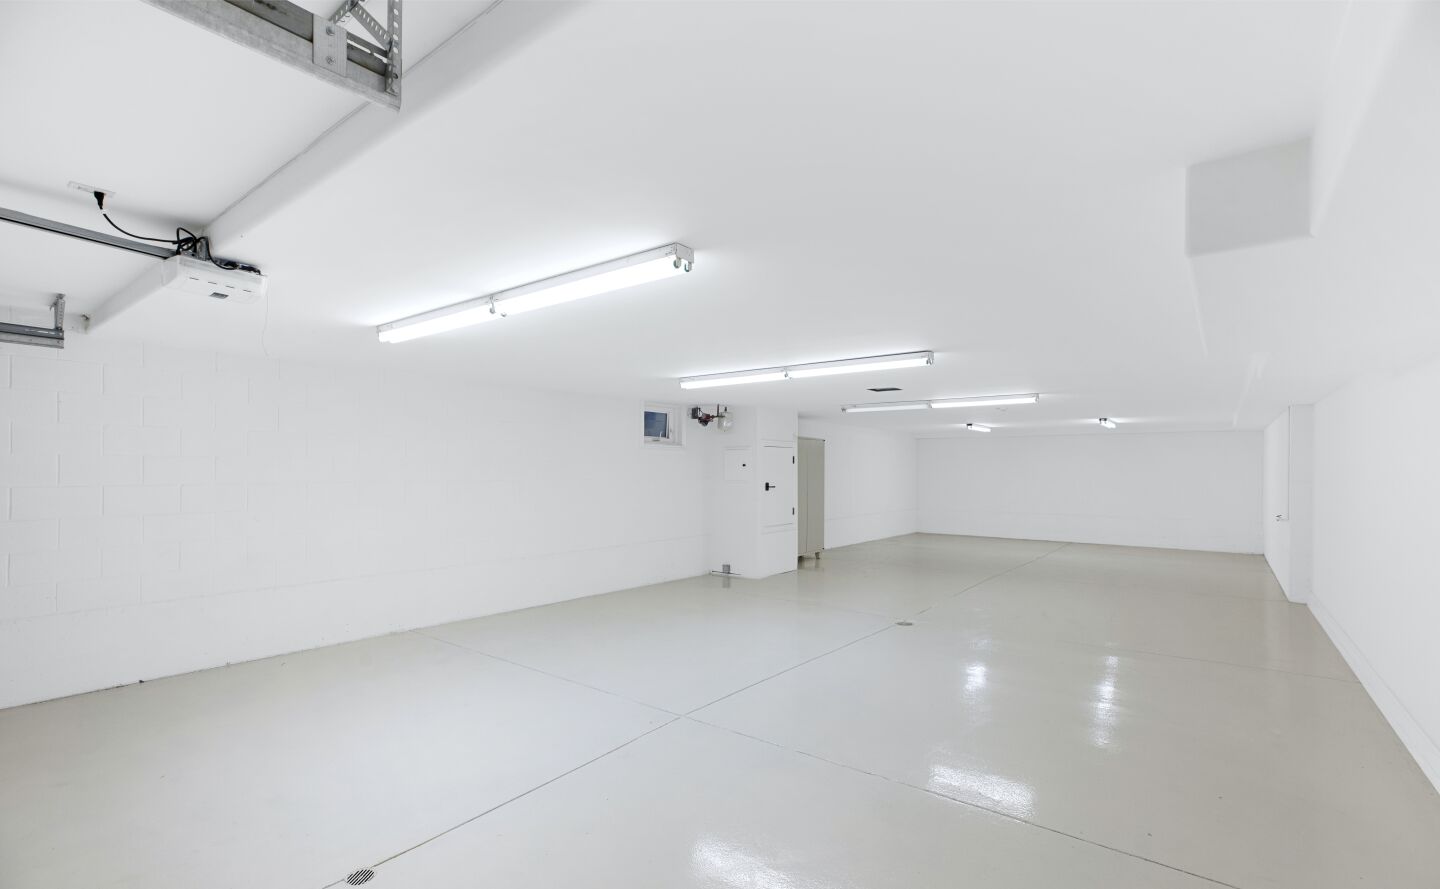 A white walled garage with tile flooring